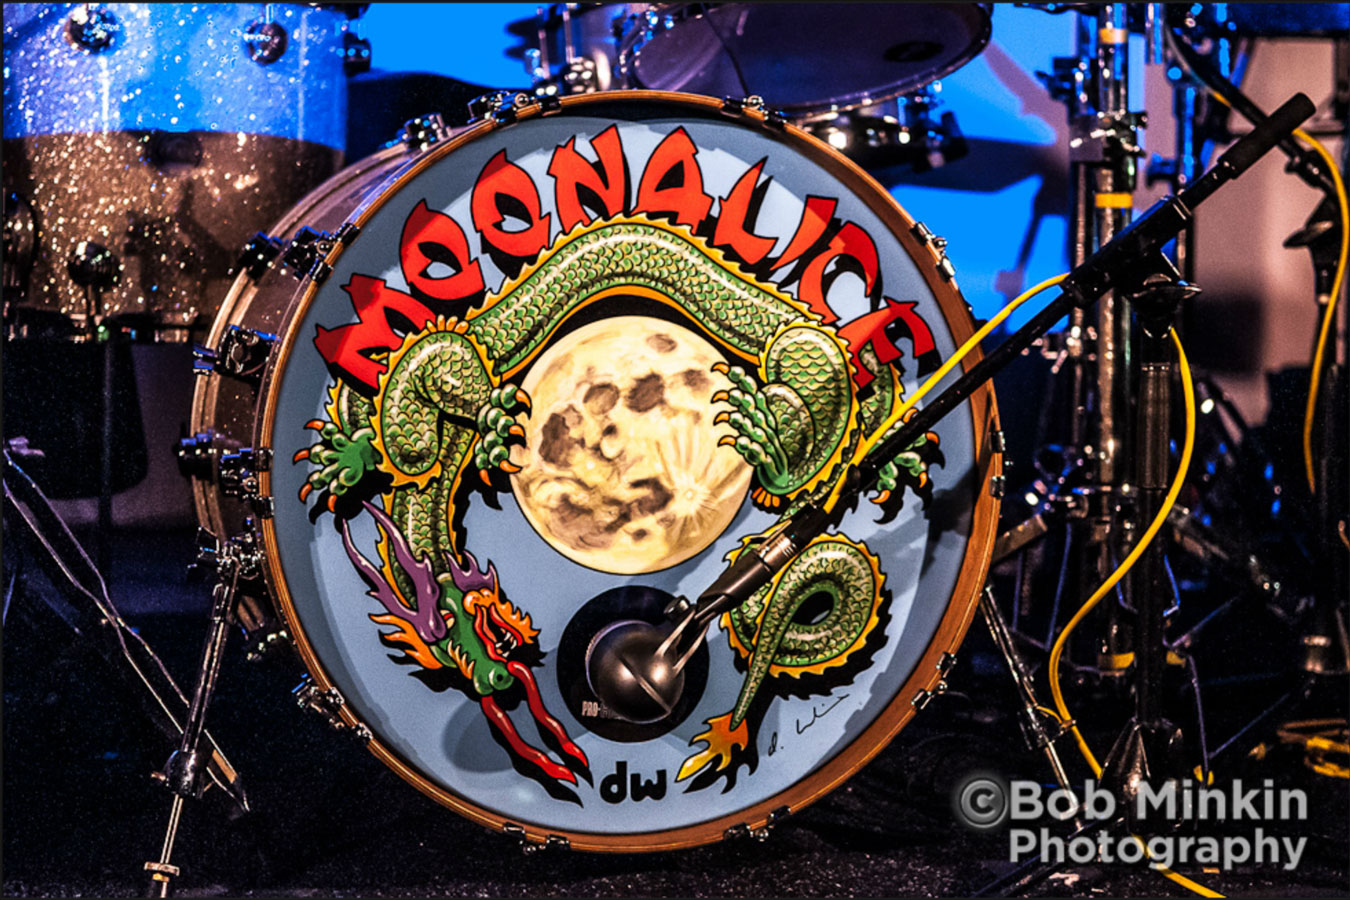 Moonalice Dragon Drum Head cover painted by Dennis Larkins, photo by Bob Minkin Photography